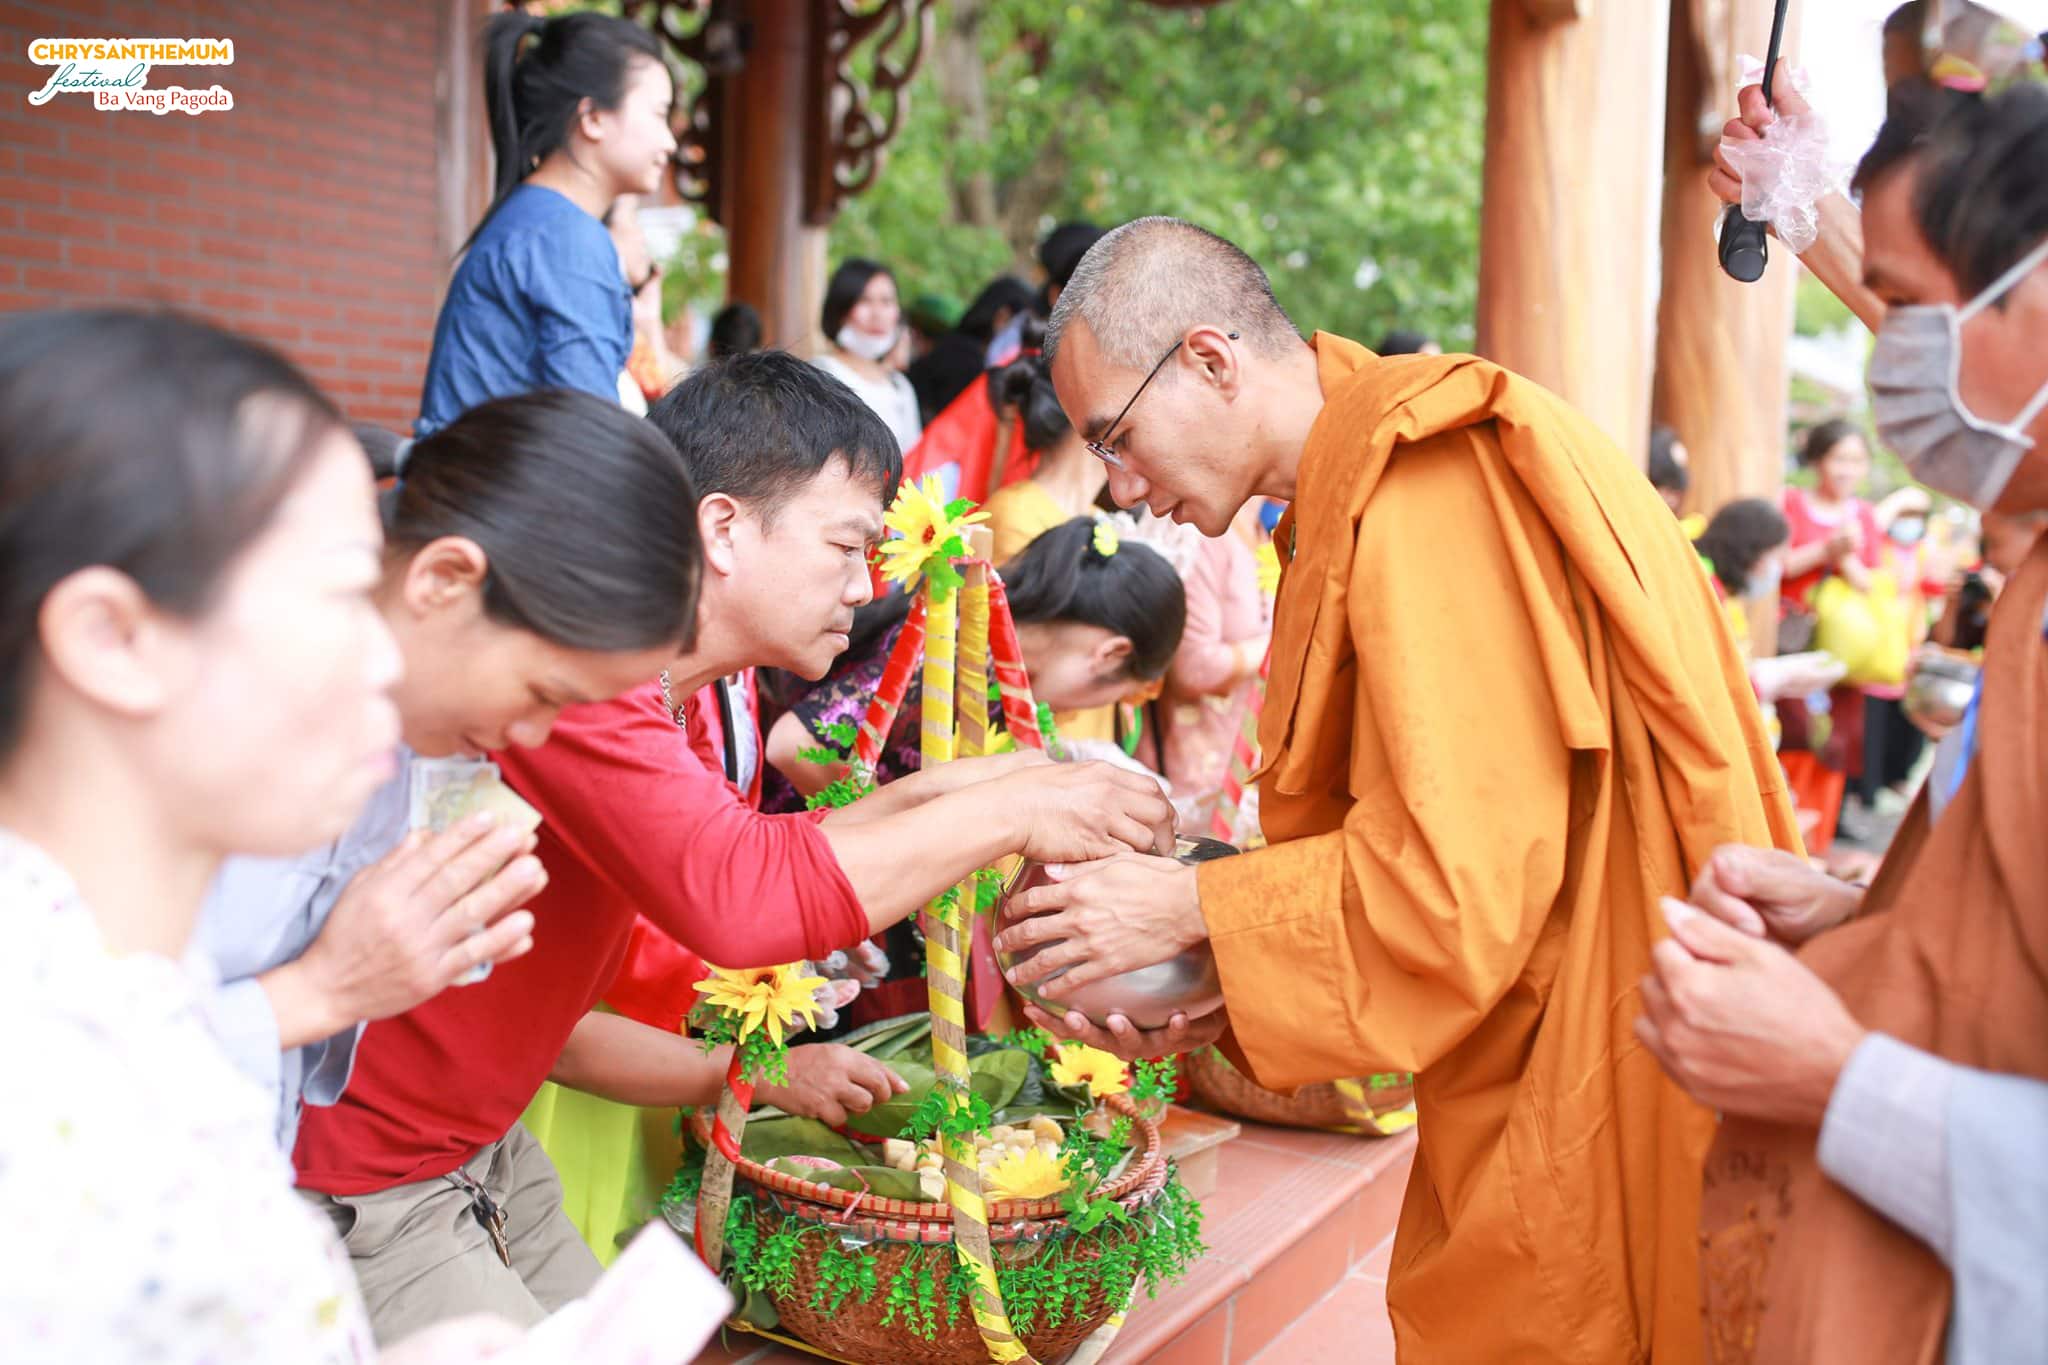 Monks receiving alms from Buddhists